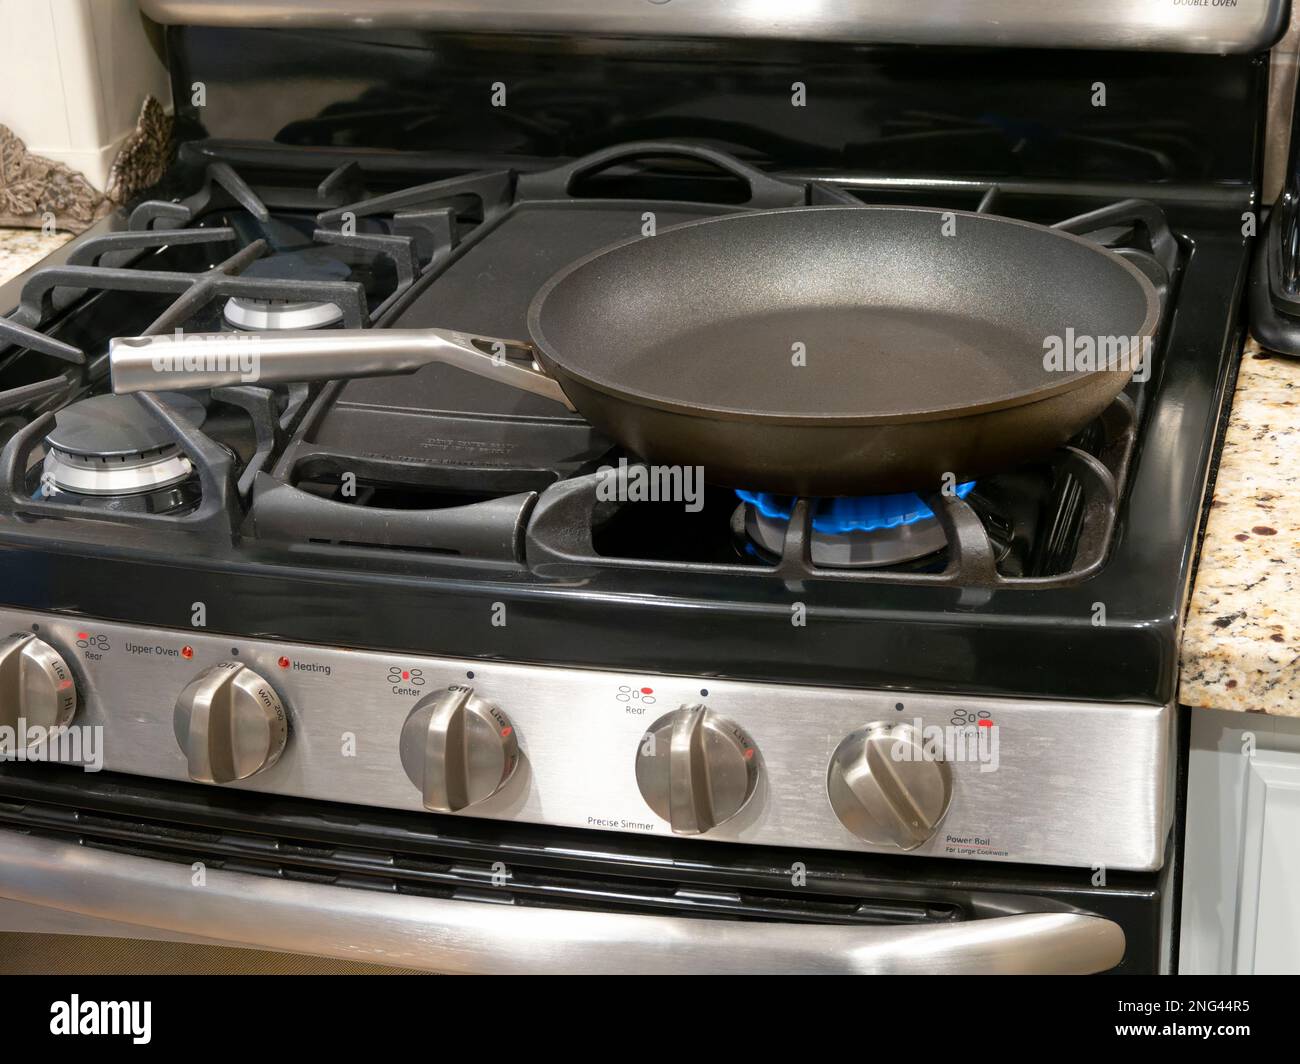 Empty skillet or frying pan for cooking on a gas stove or stovetop in a home in the USA. Stock Photo